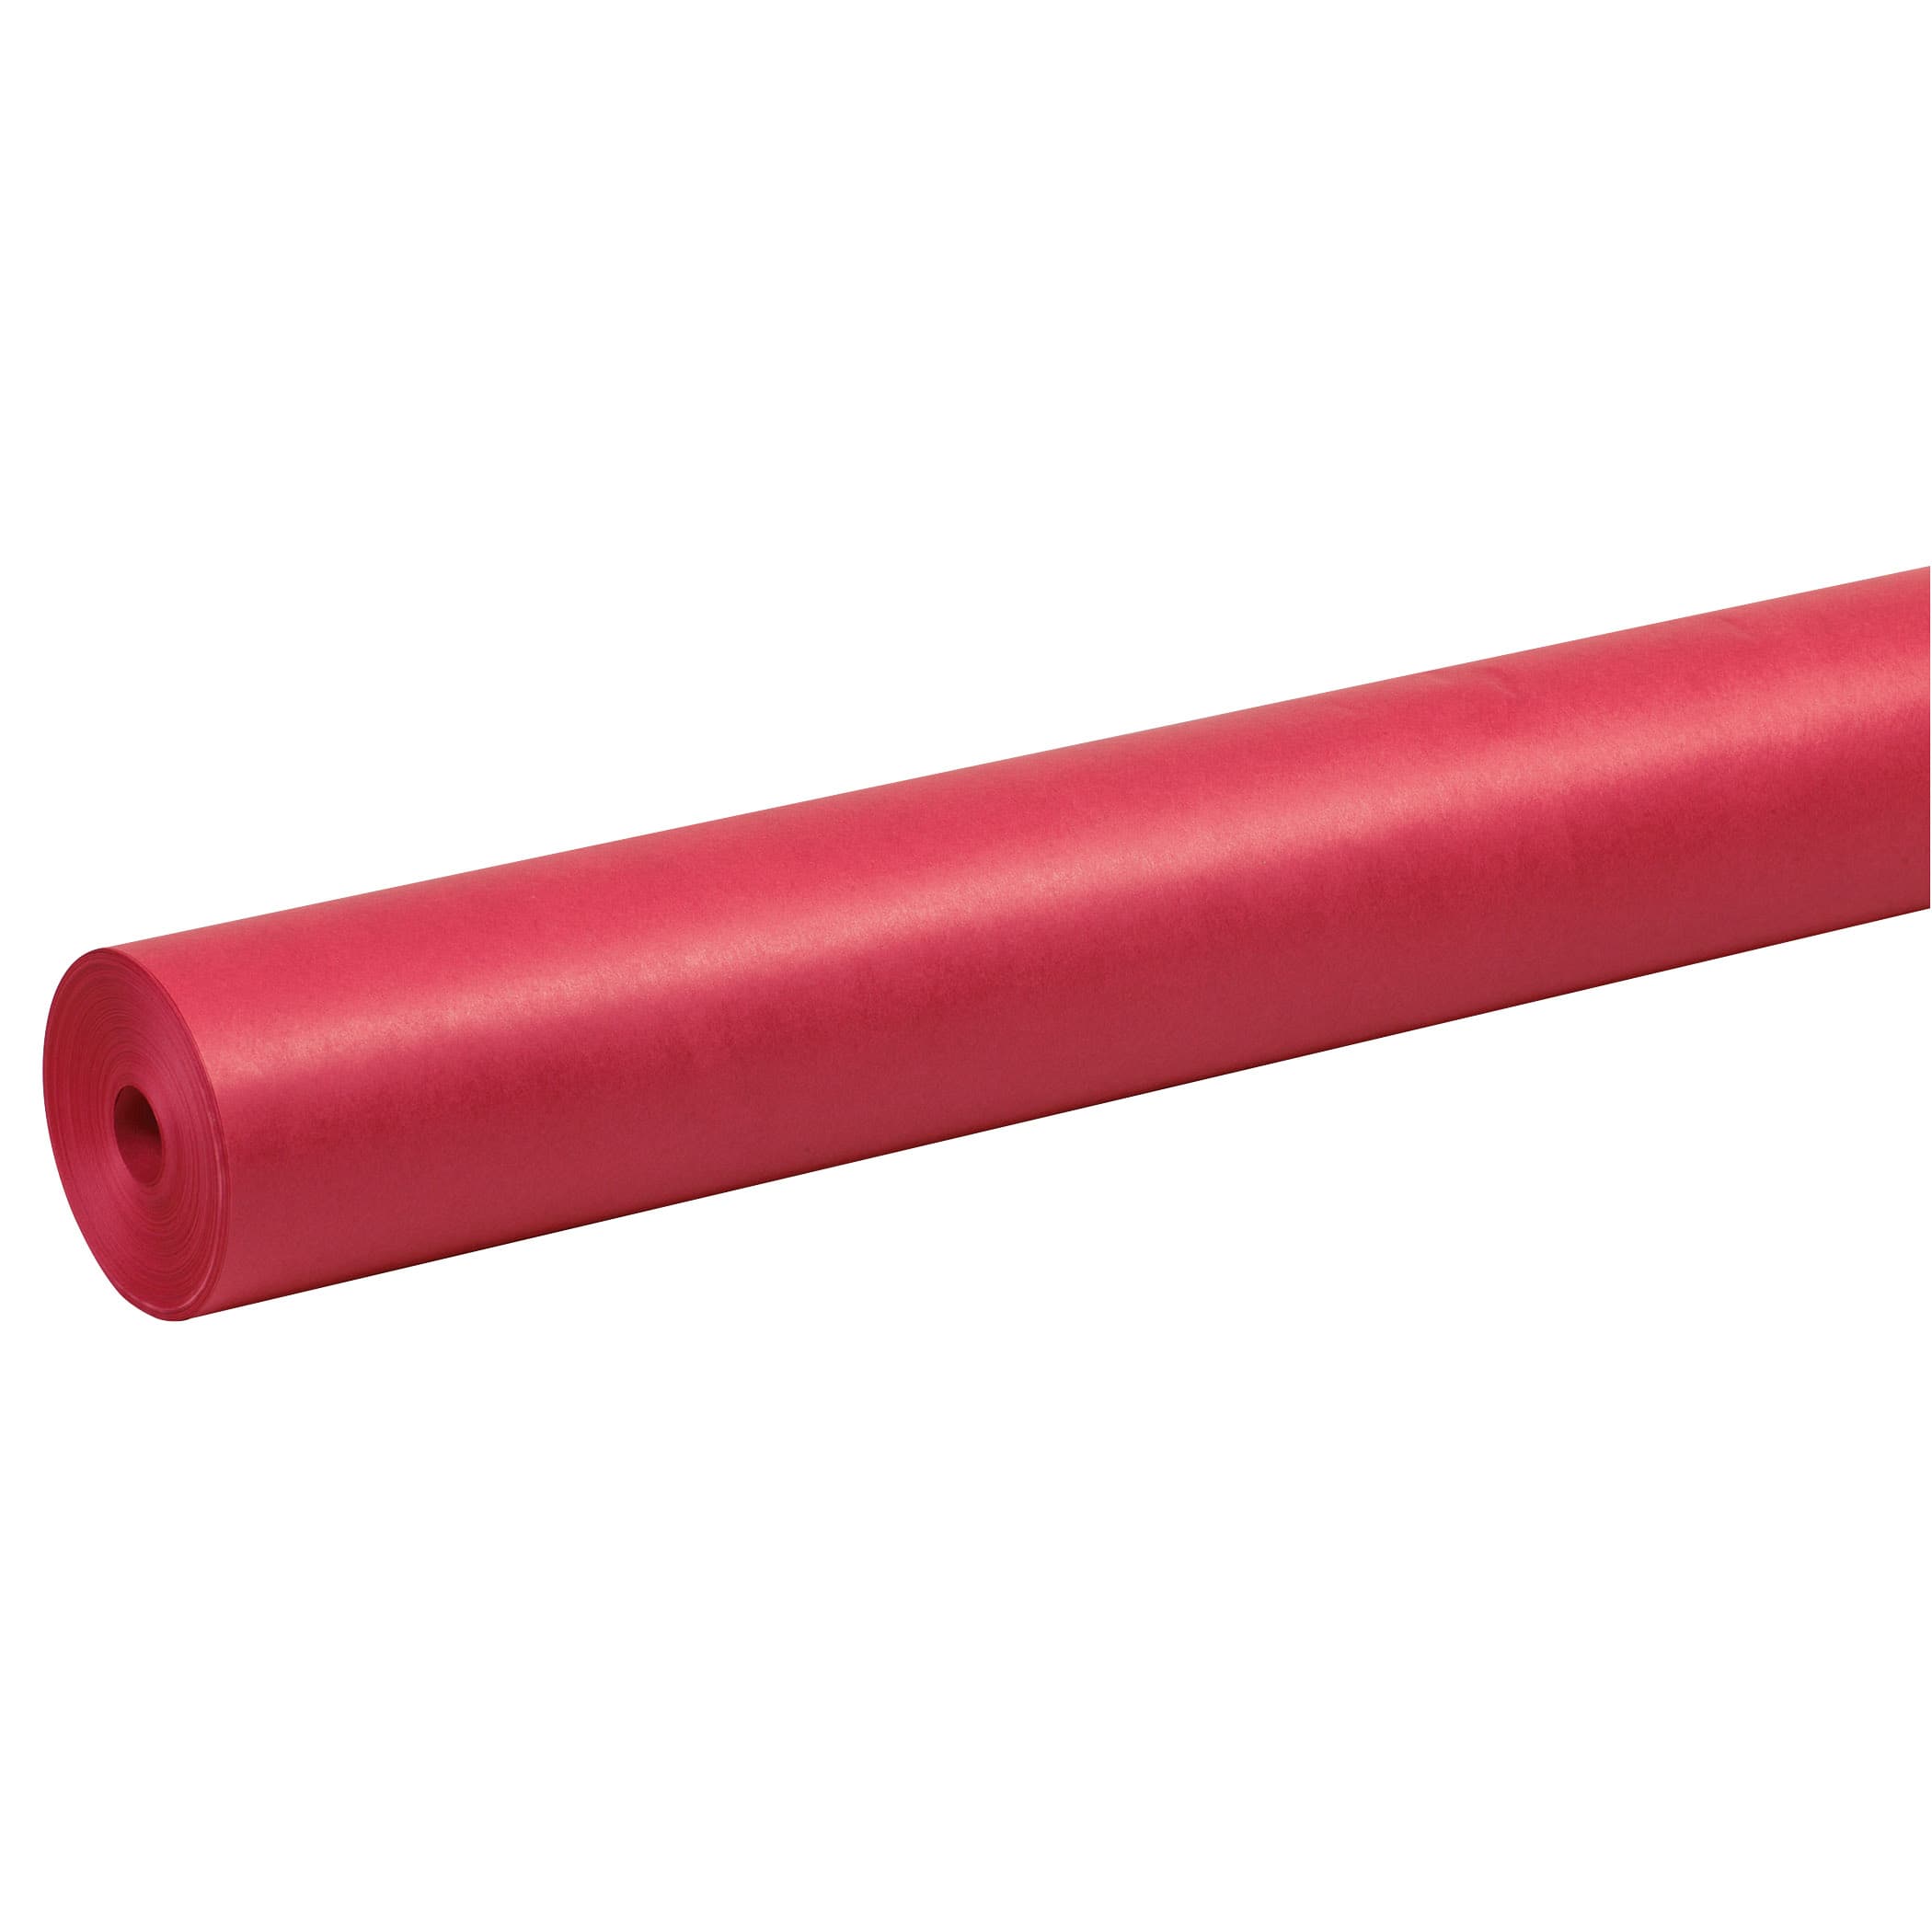 6 ft x 167 ft Grip-Rite Red Rosin Paper at Badgerland Supply, Inc.